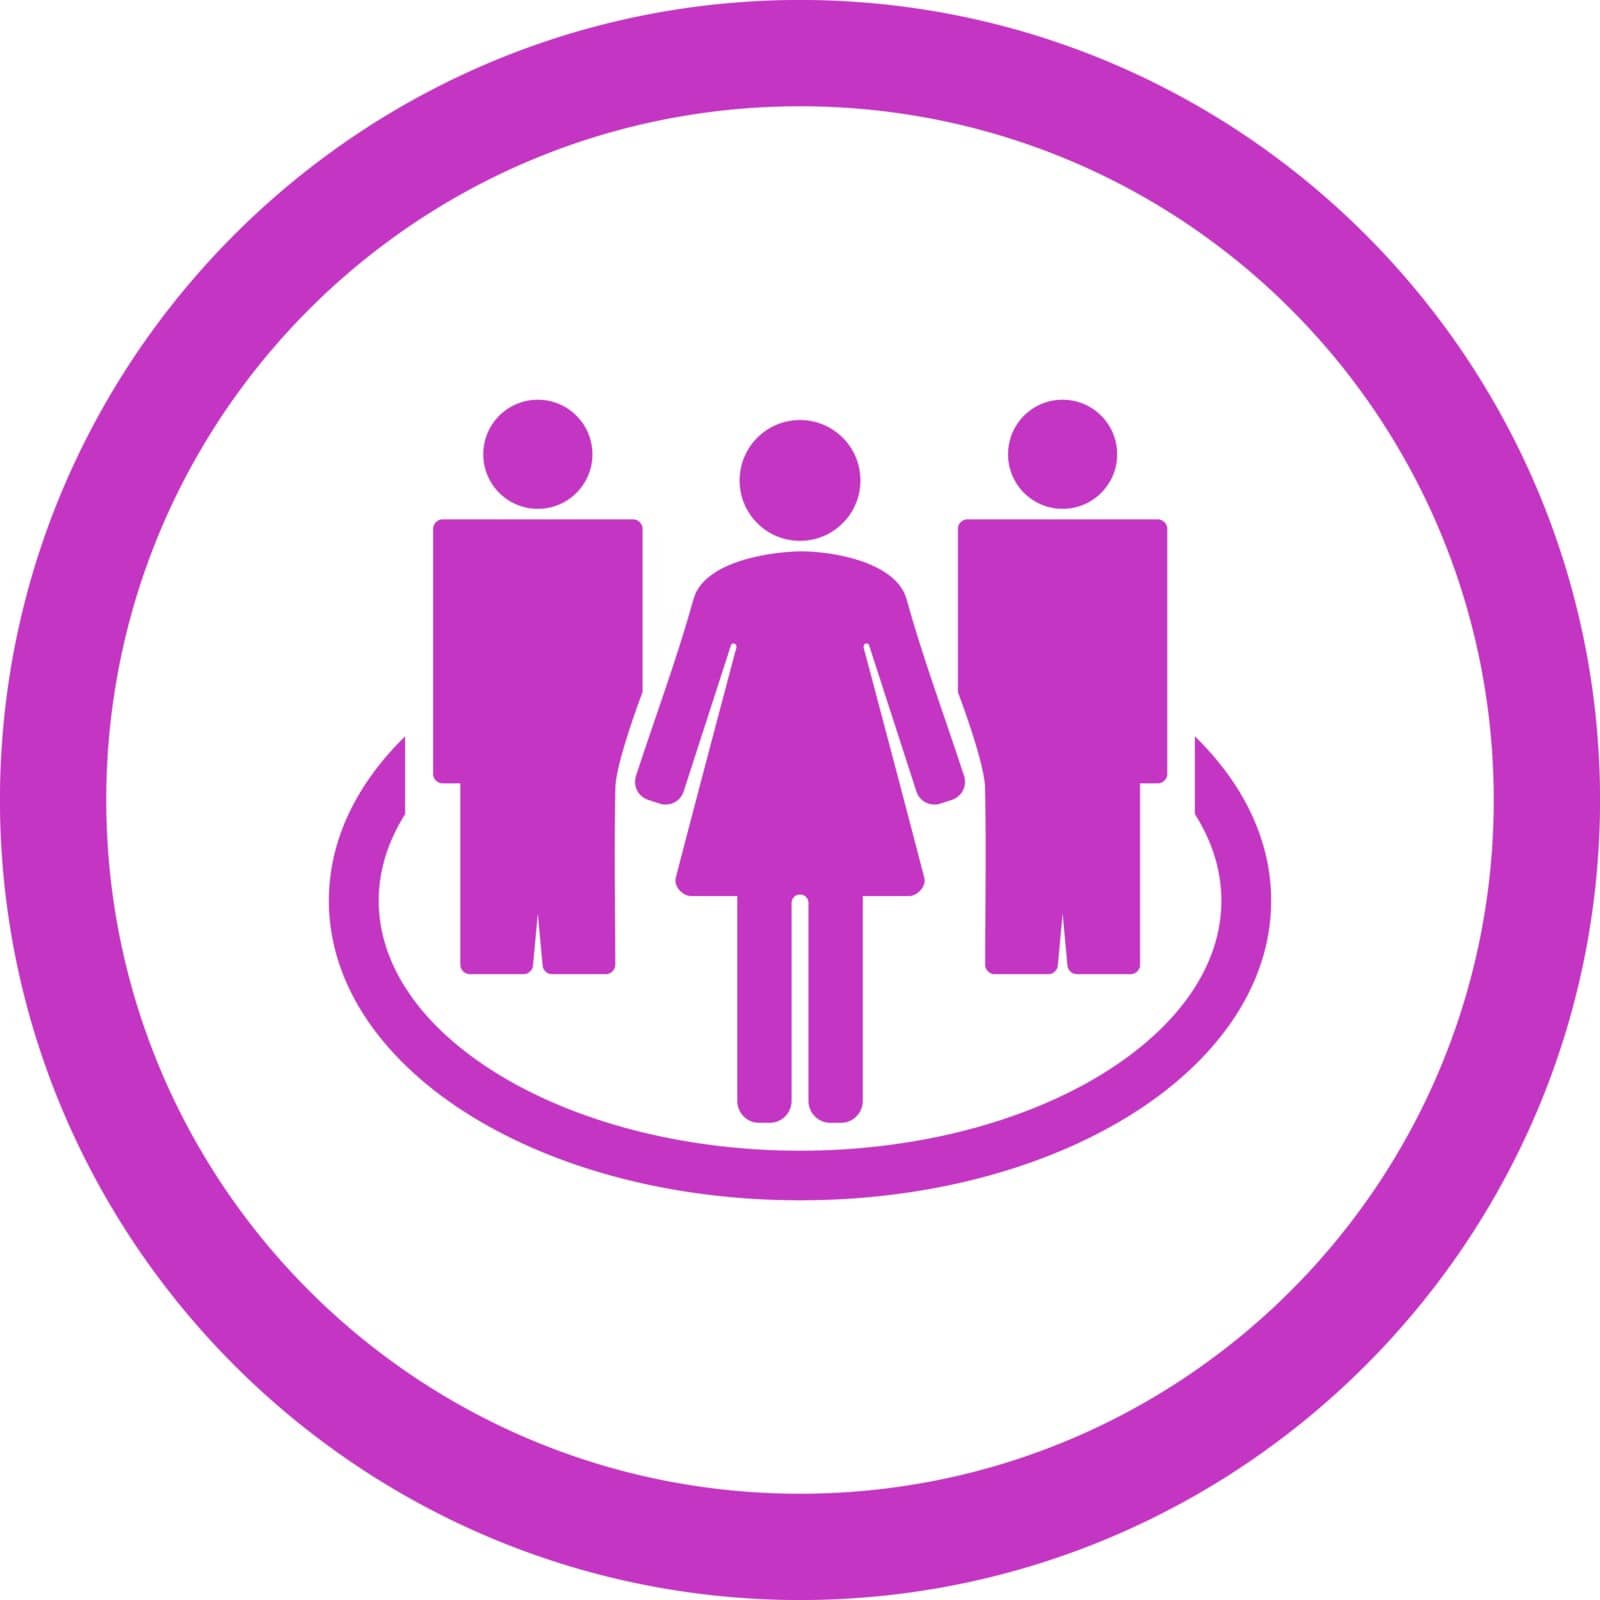 Society vector icon. This rounded flat symbol is drawn with violet color on a white background.